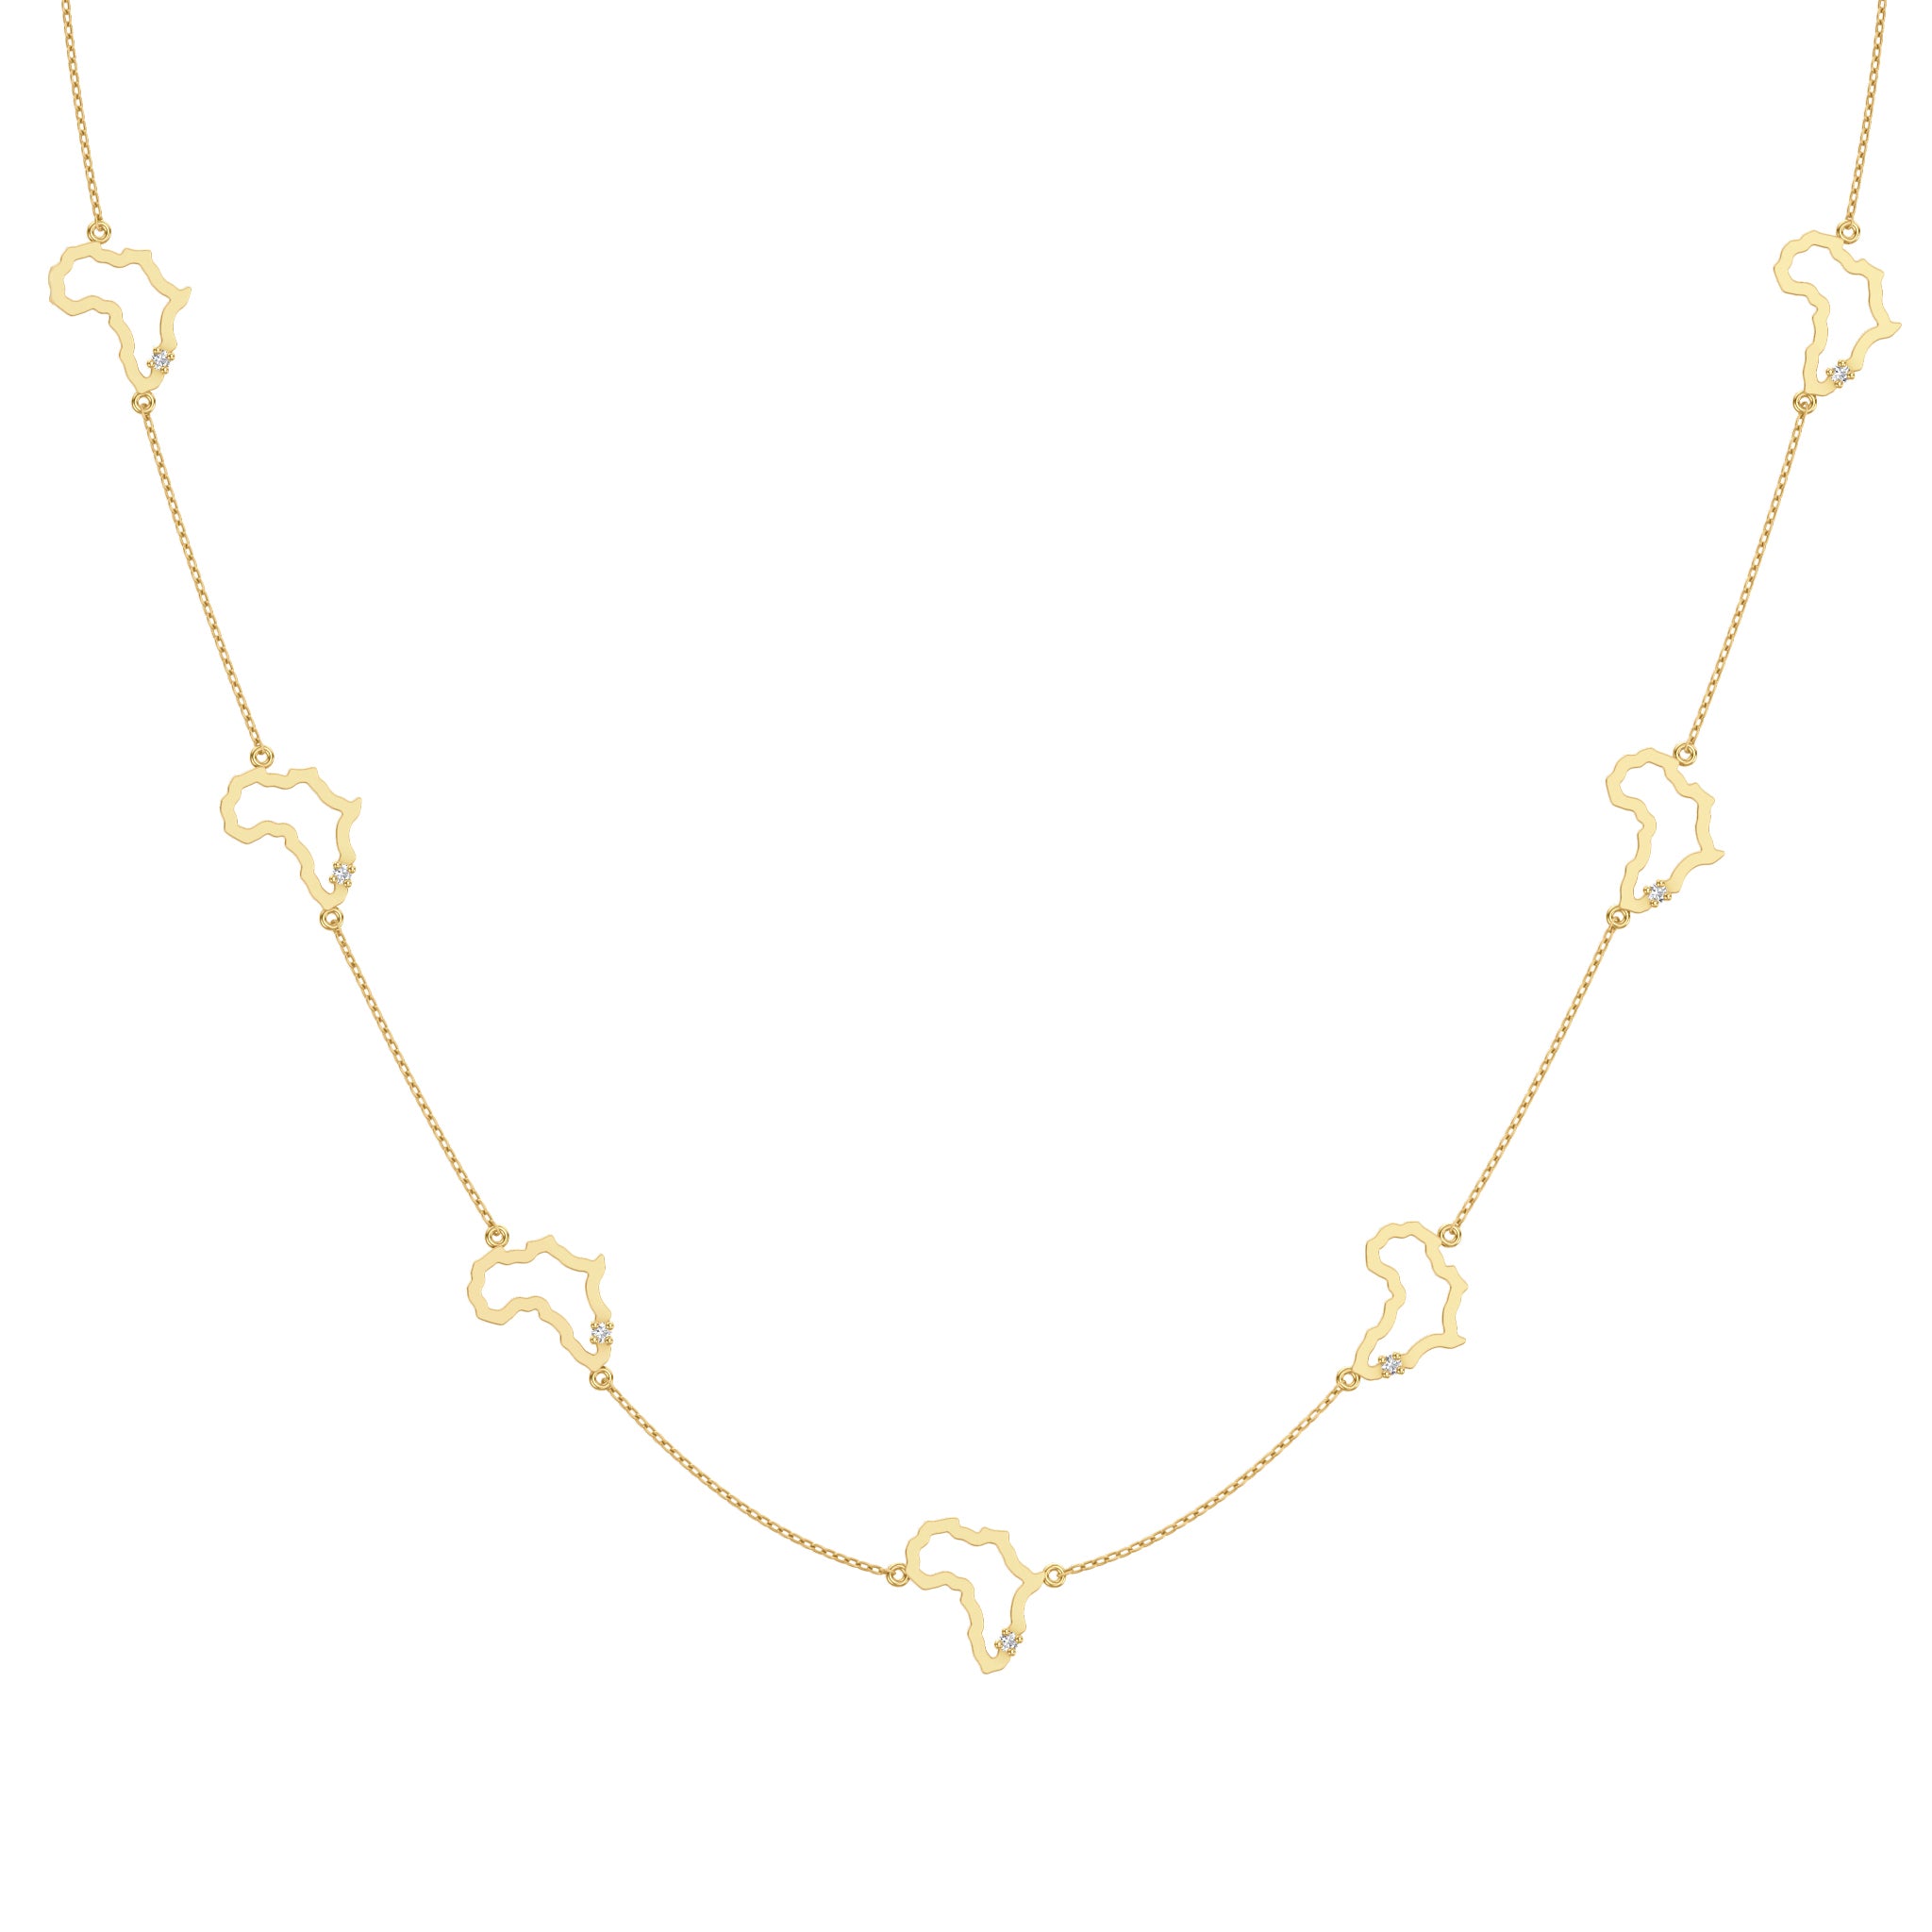 Shimansky - My Africa Diamond Station Necklace Crafted in 14K Yellow Gold